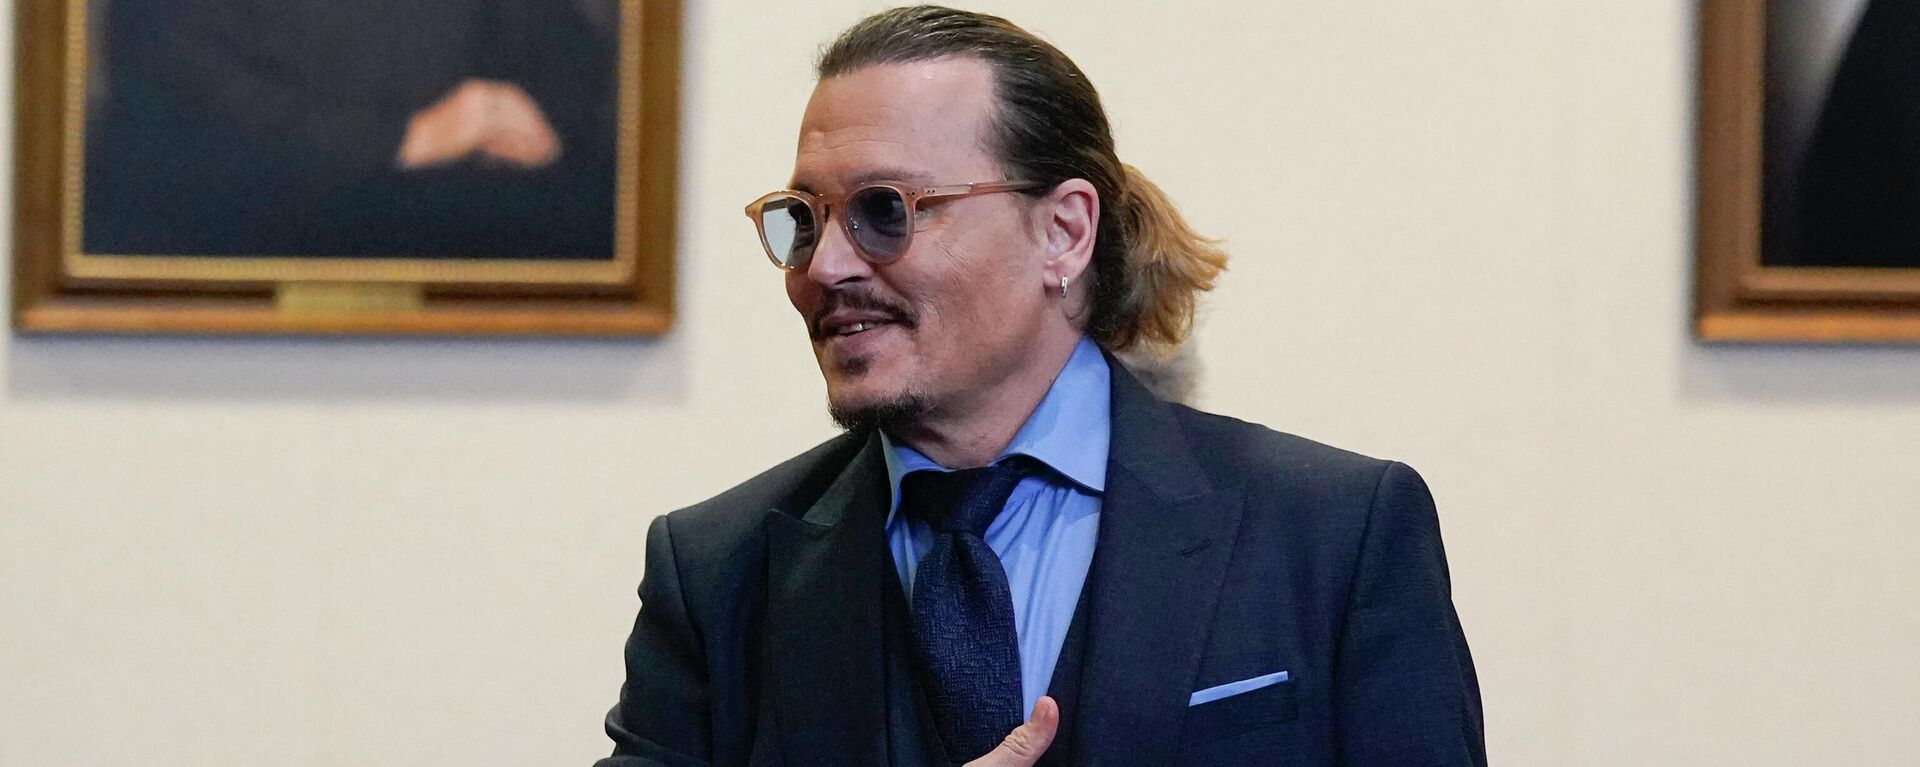 In this file photo taken on May 27, 2022 Actor Johnny Depp gestures to spectators in court after closing arguments at the Fairfax County Circuit Courthouse in Fairfax, Virginia. - Sputnik International, 1920, 02.06.2022